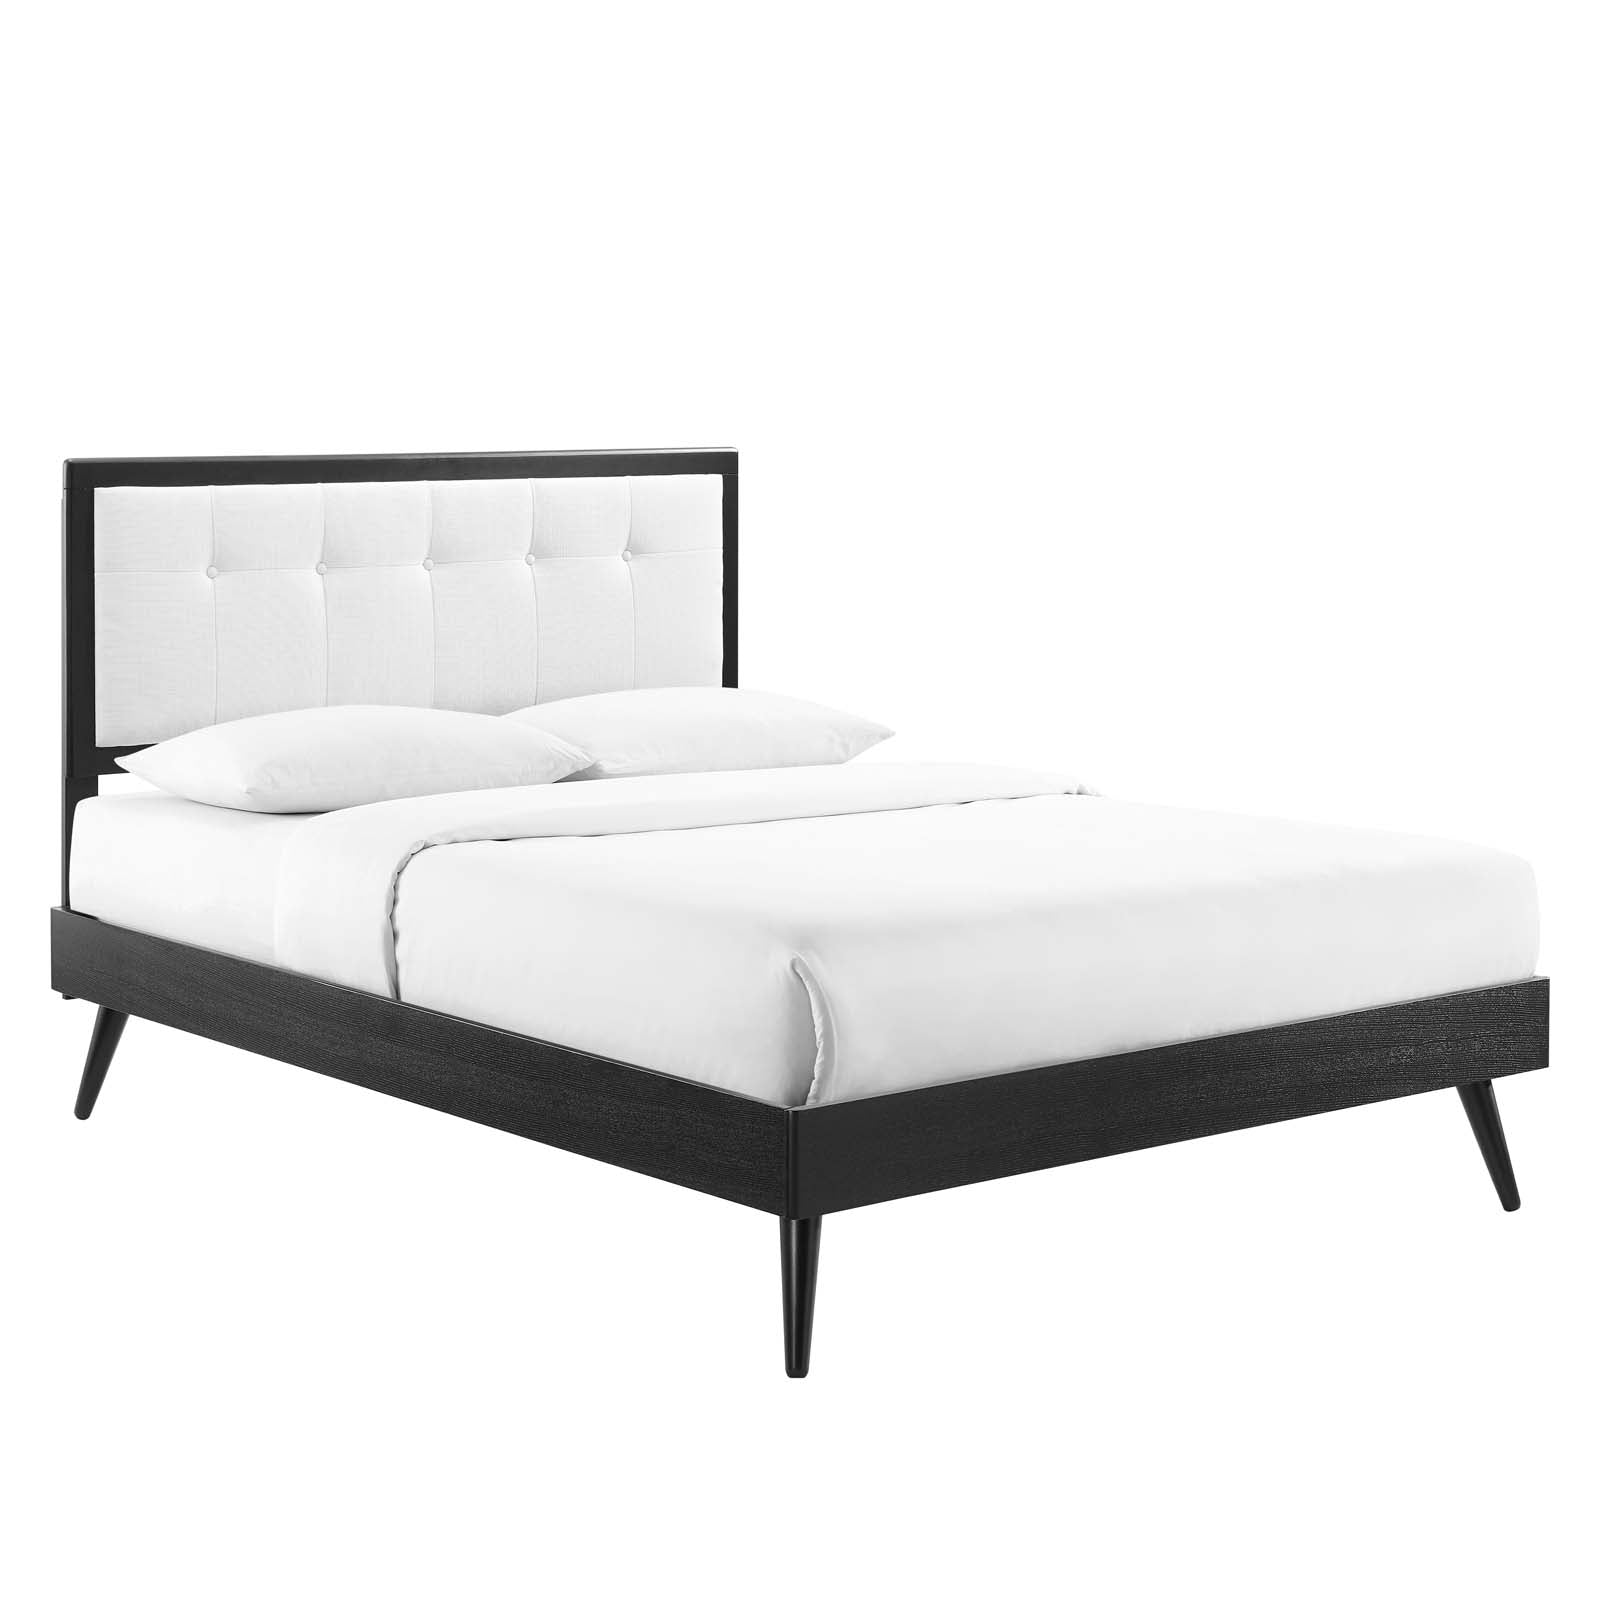 Modway Beds - Willow Queen Wood Platform Bed With Splayed Legs Black White